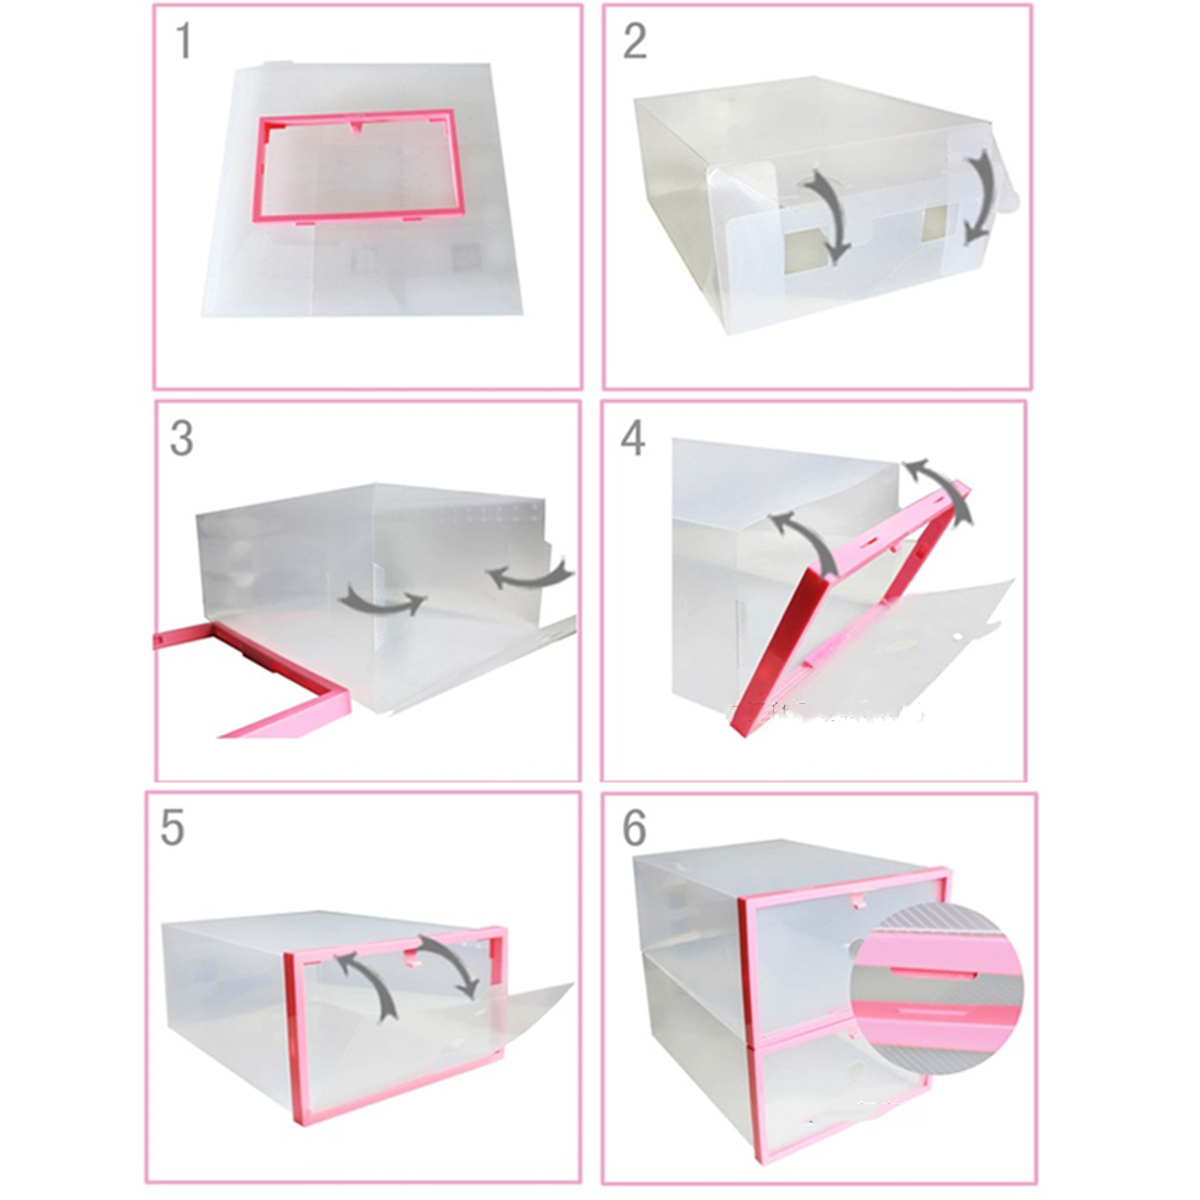 Foldable-Clear-Plastic-Shoe-Boxes-Storage-Organizer-Stackable-Tidy-Display-Box-Baskets-1465766-7